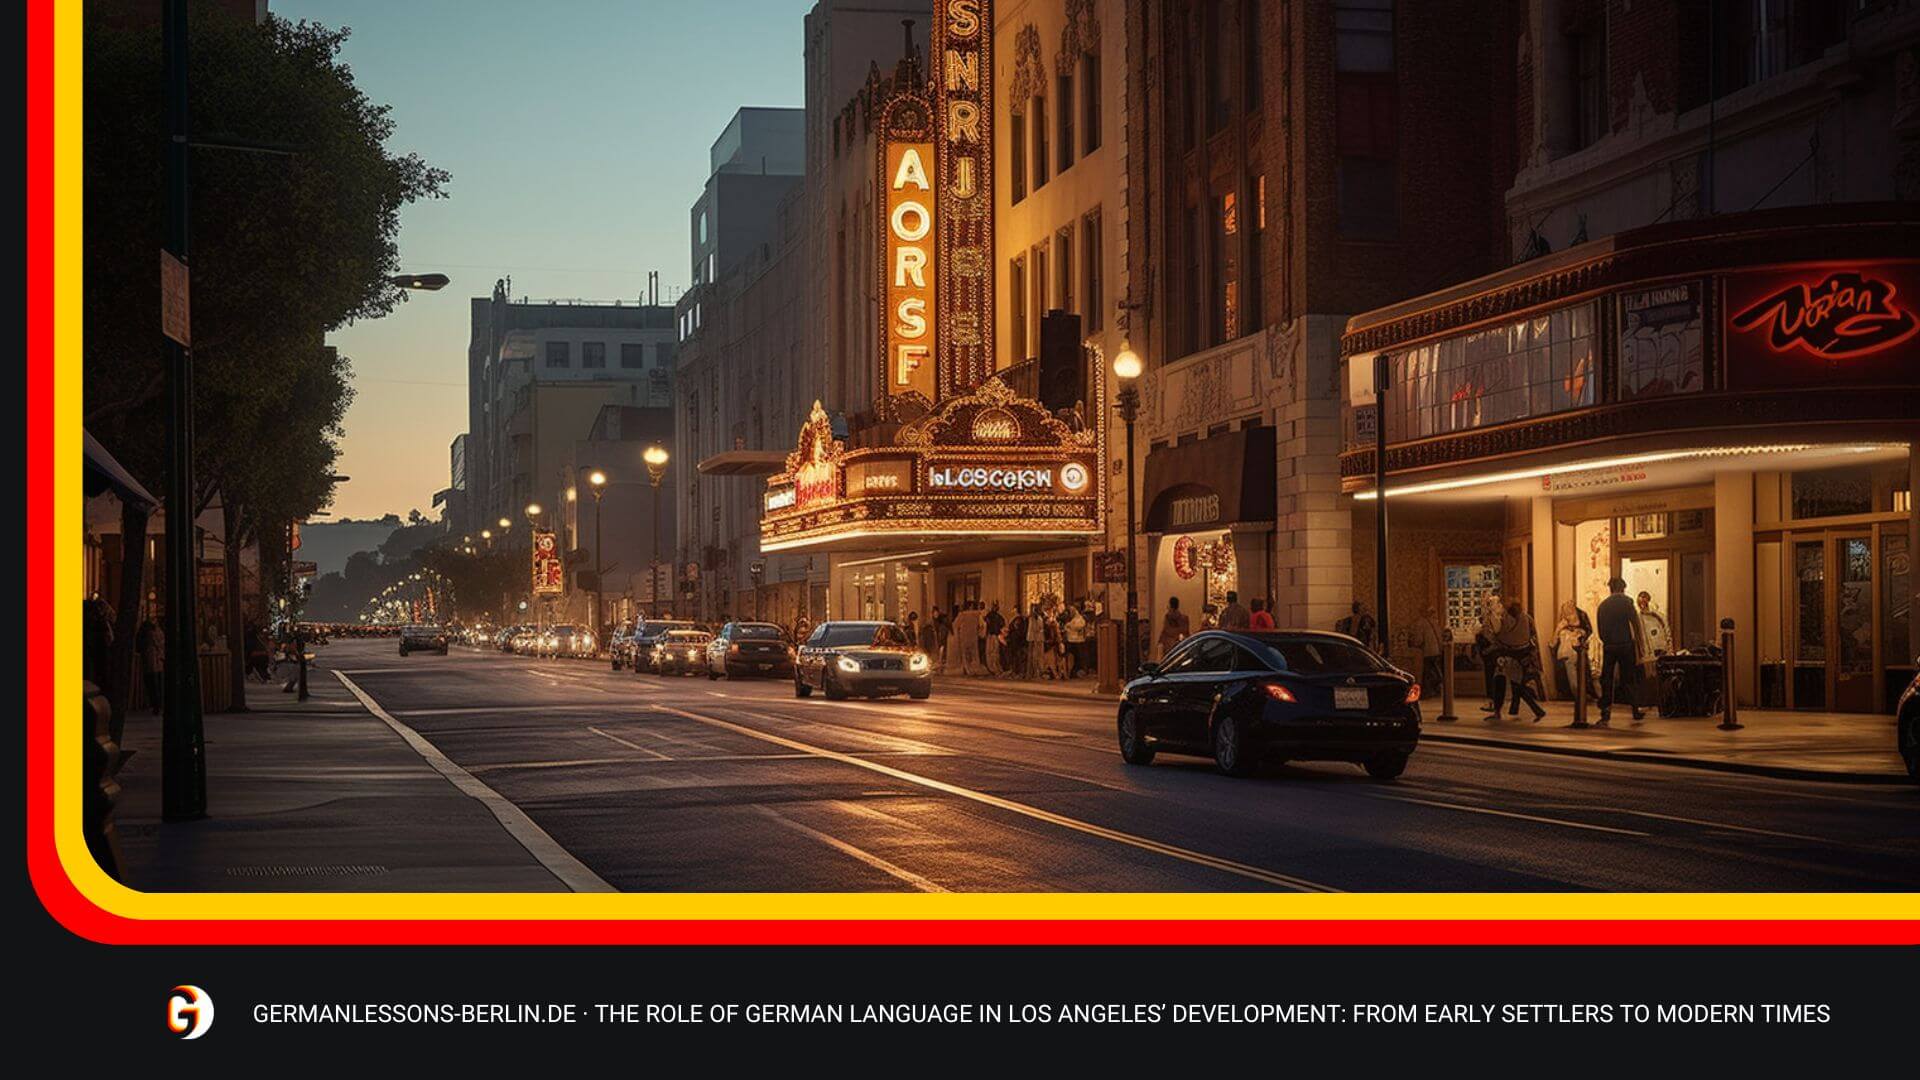 The Role Of German Language In Los Angeles’ Development: From Early Settlers To Modern Times